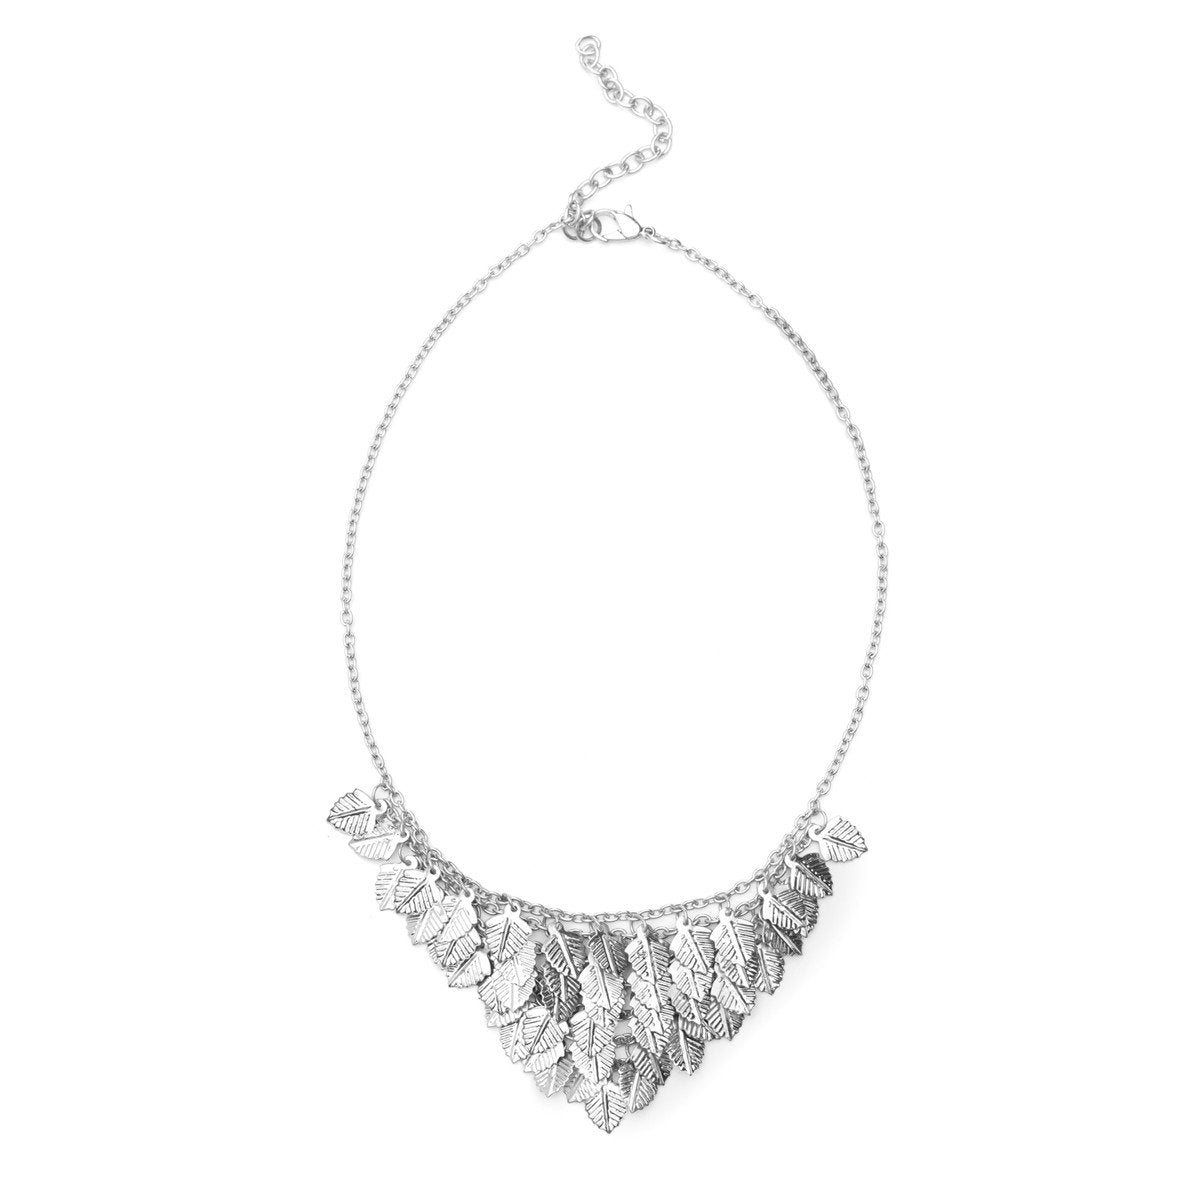 Falling Leaves Necklace - Silver